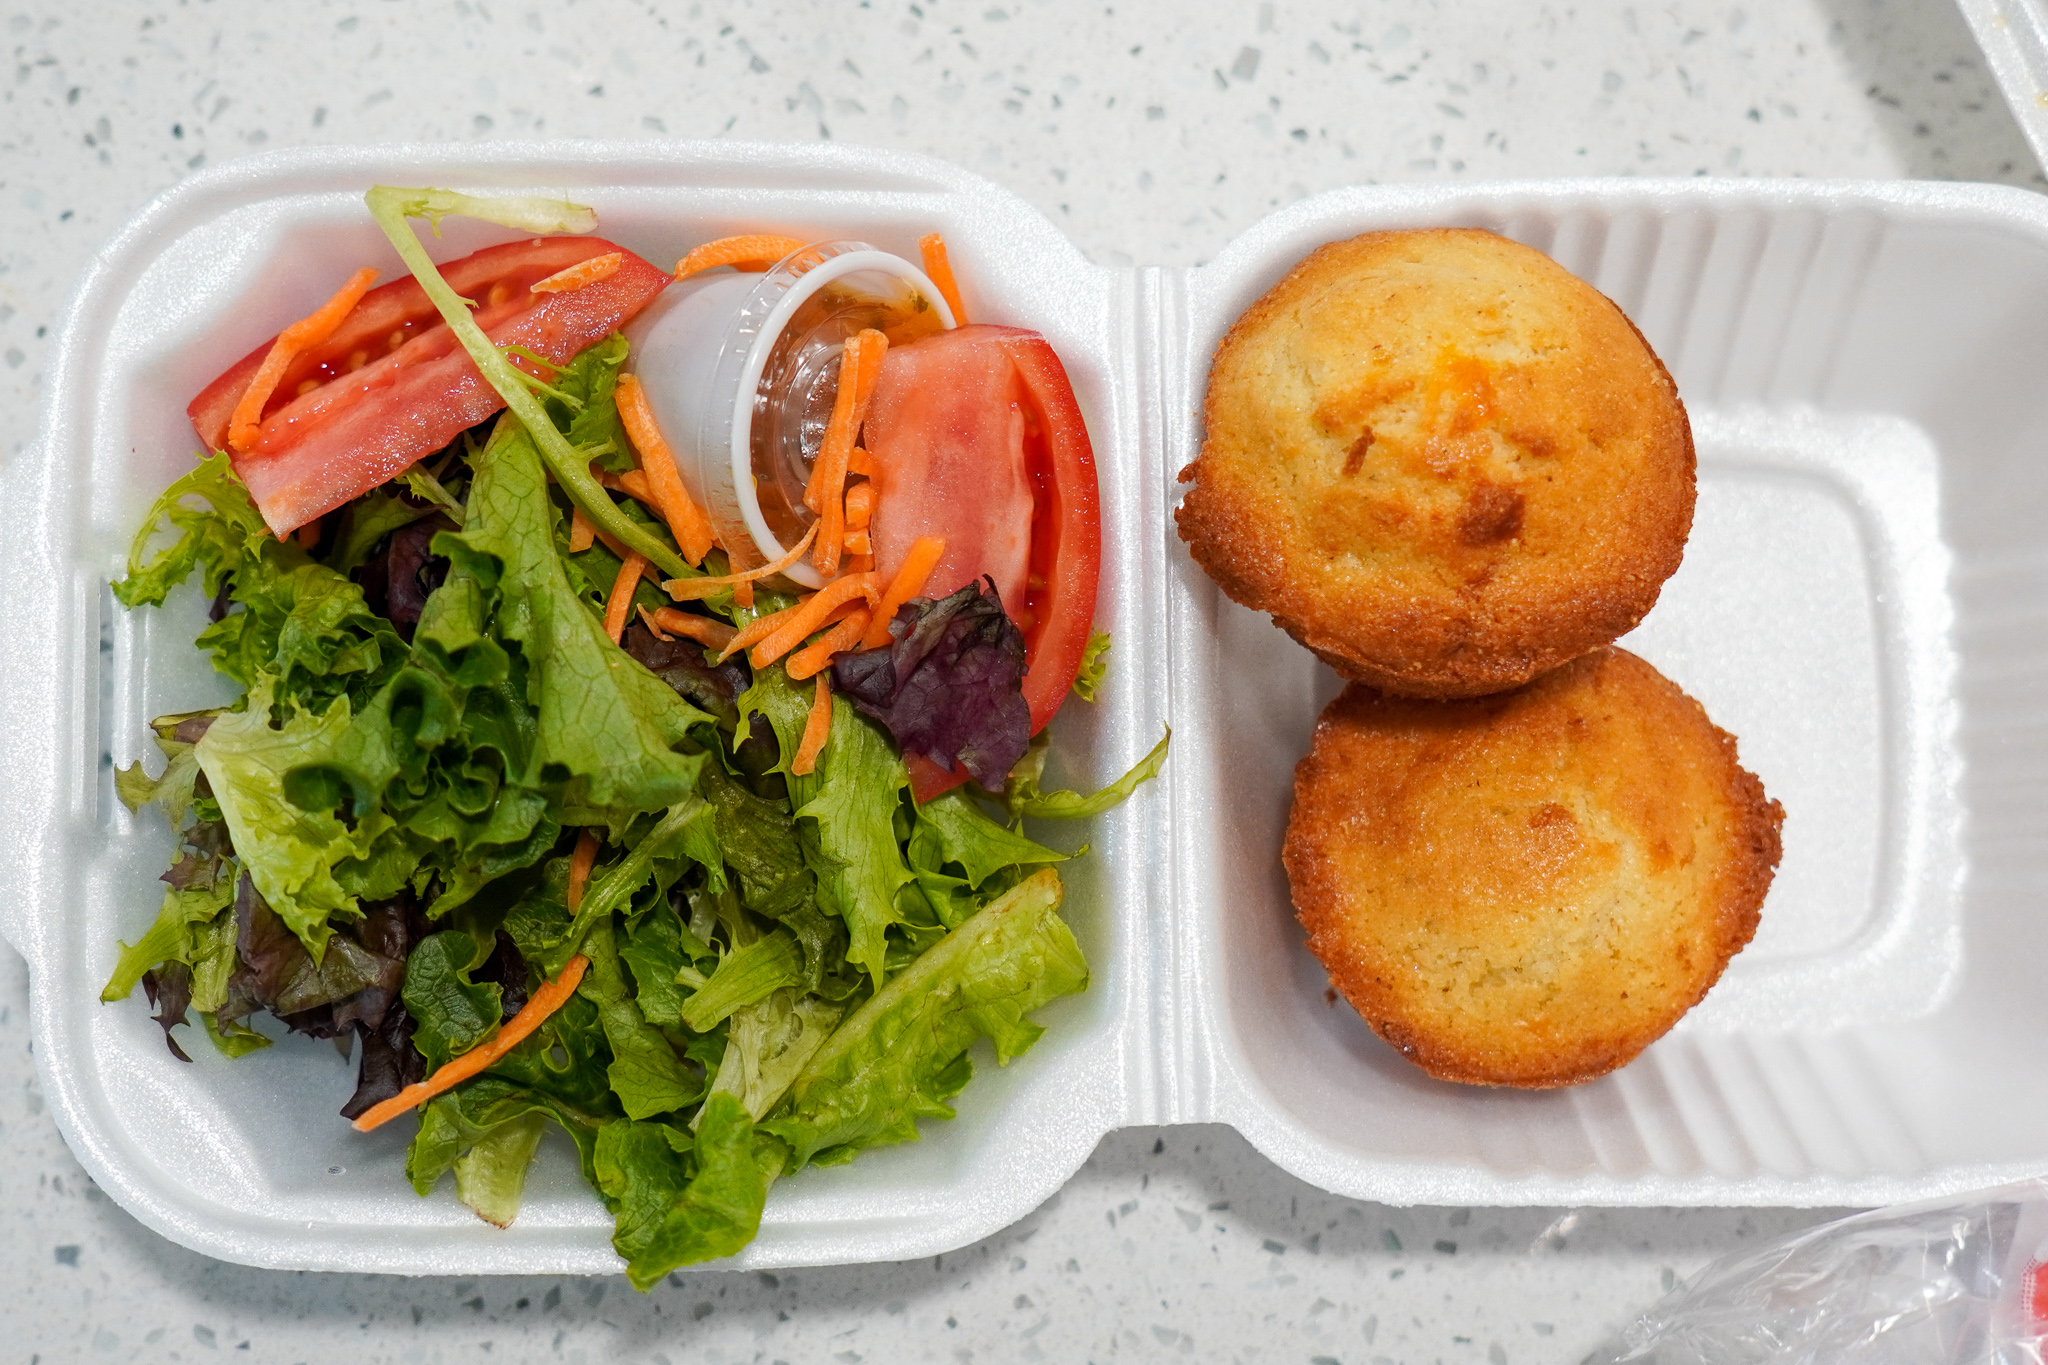 Chief's Creole Cafe House Salad and Corn Muffins